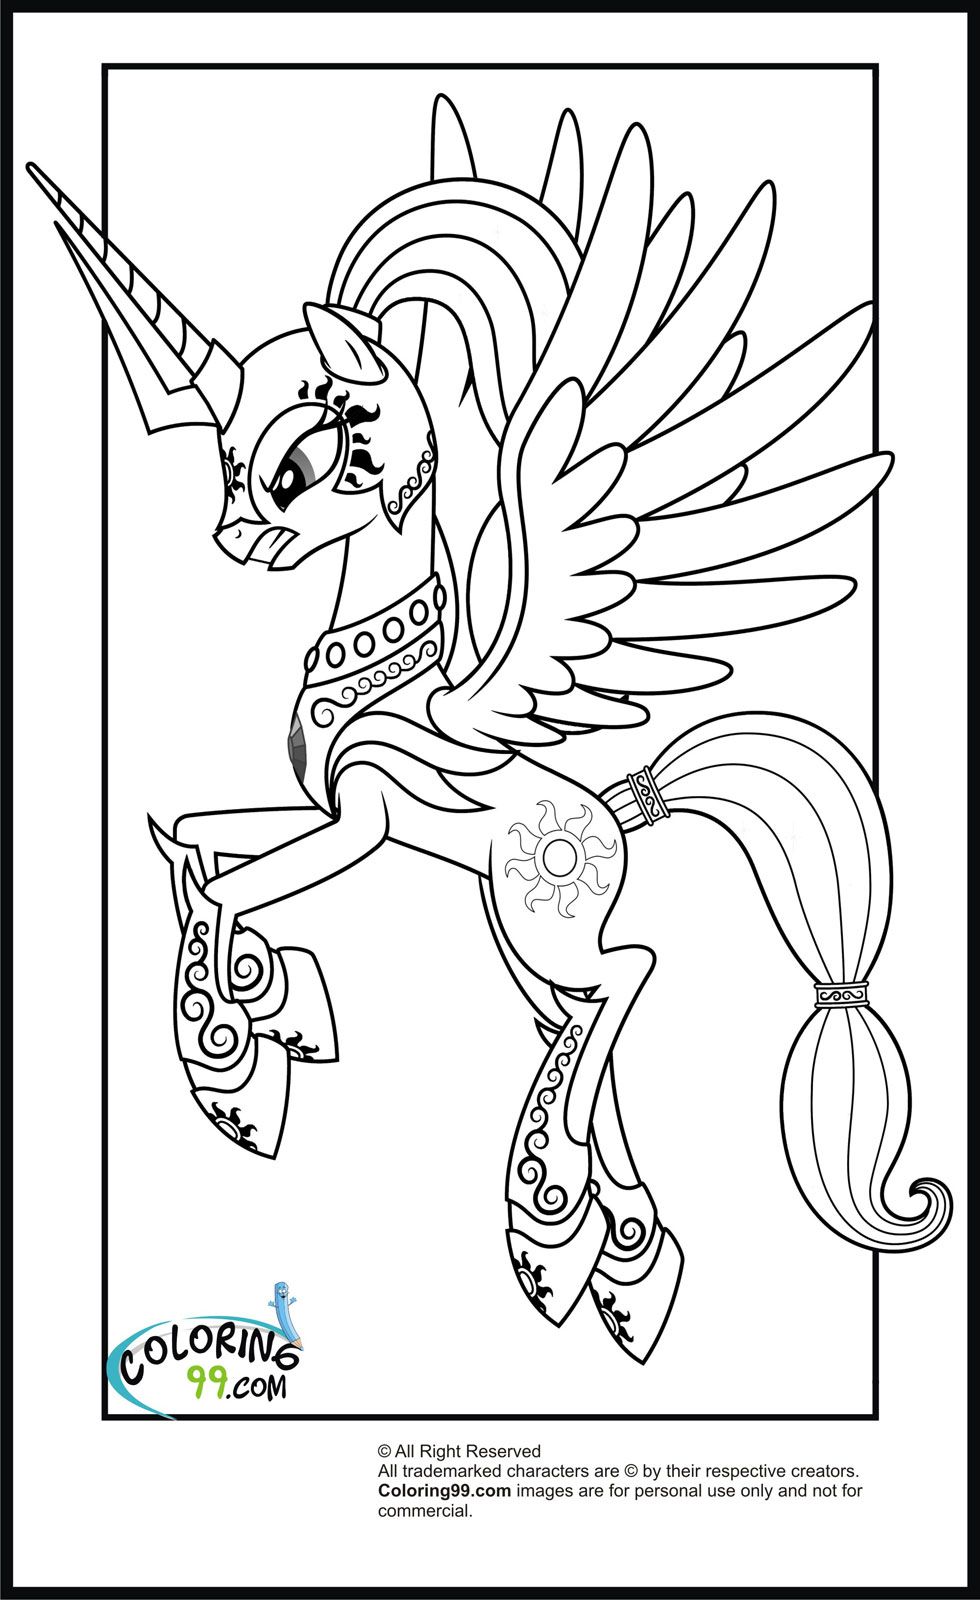 Princess celestia ready for battle my little pony coloring unicorn coloring pages horse coloring pages